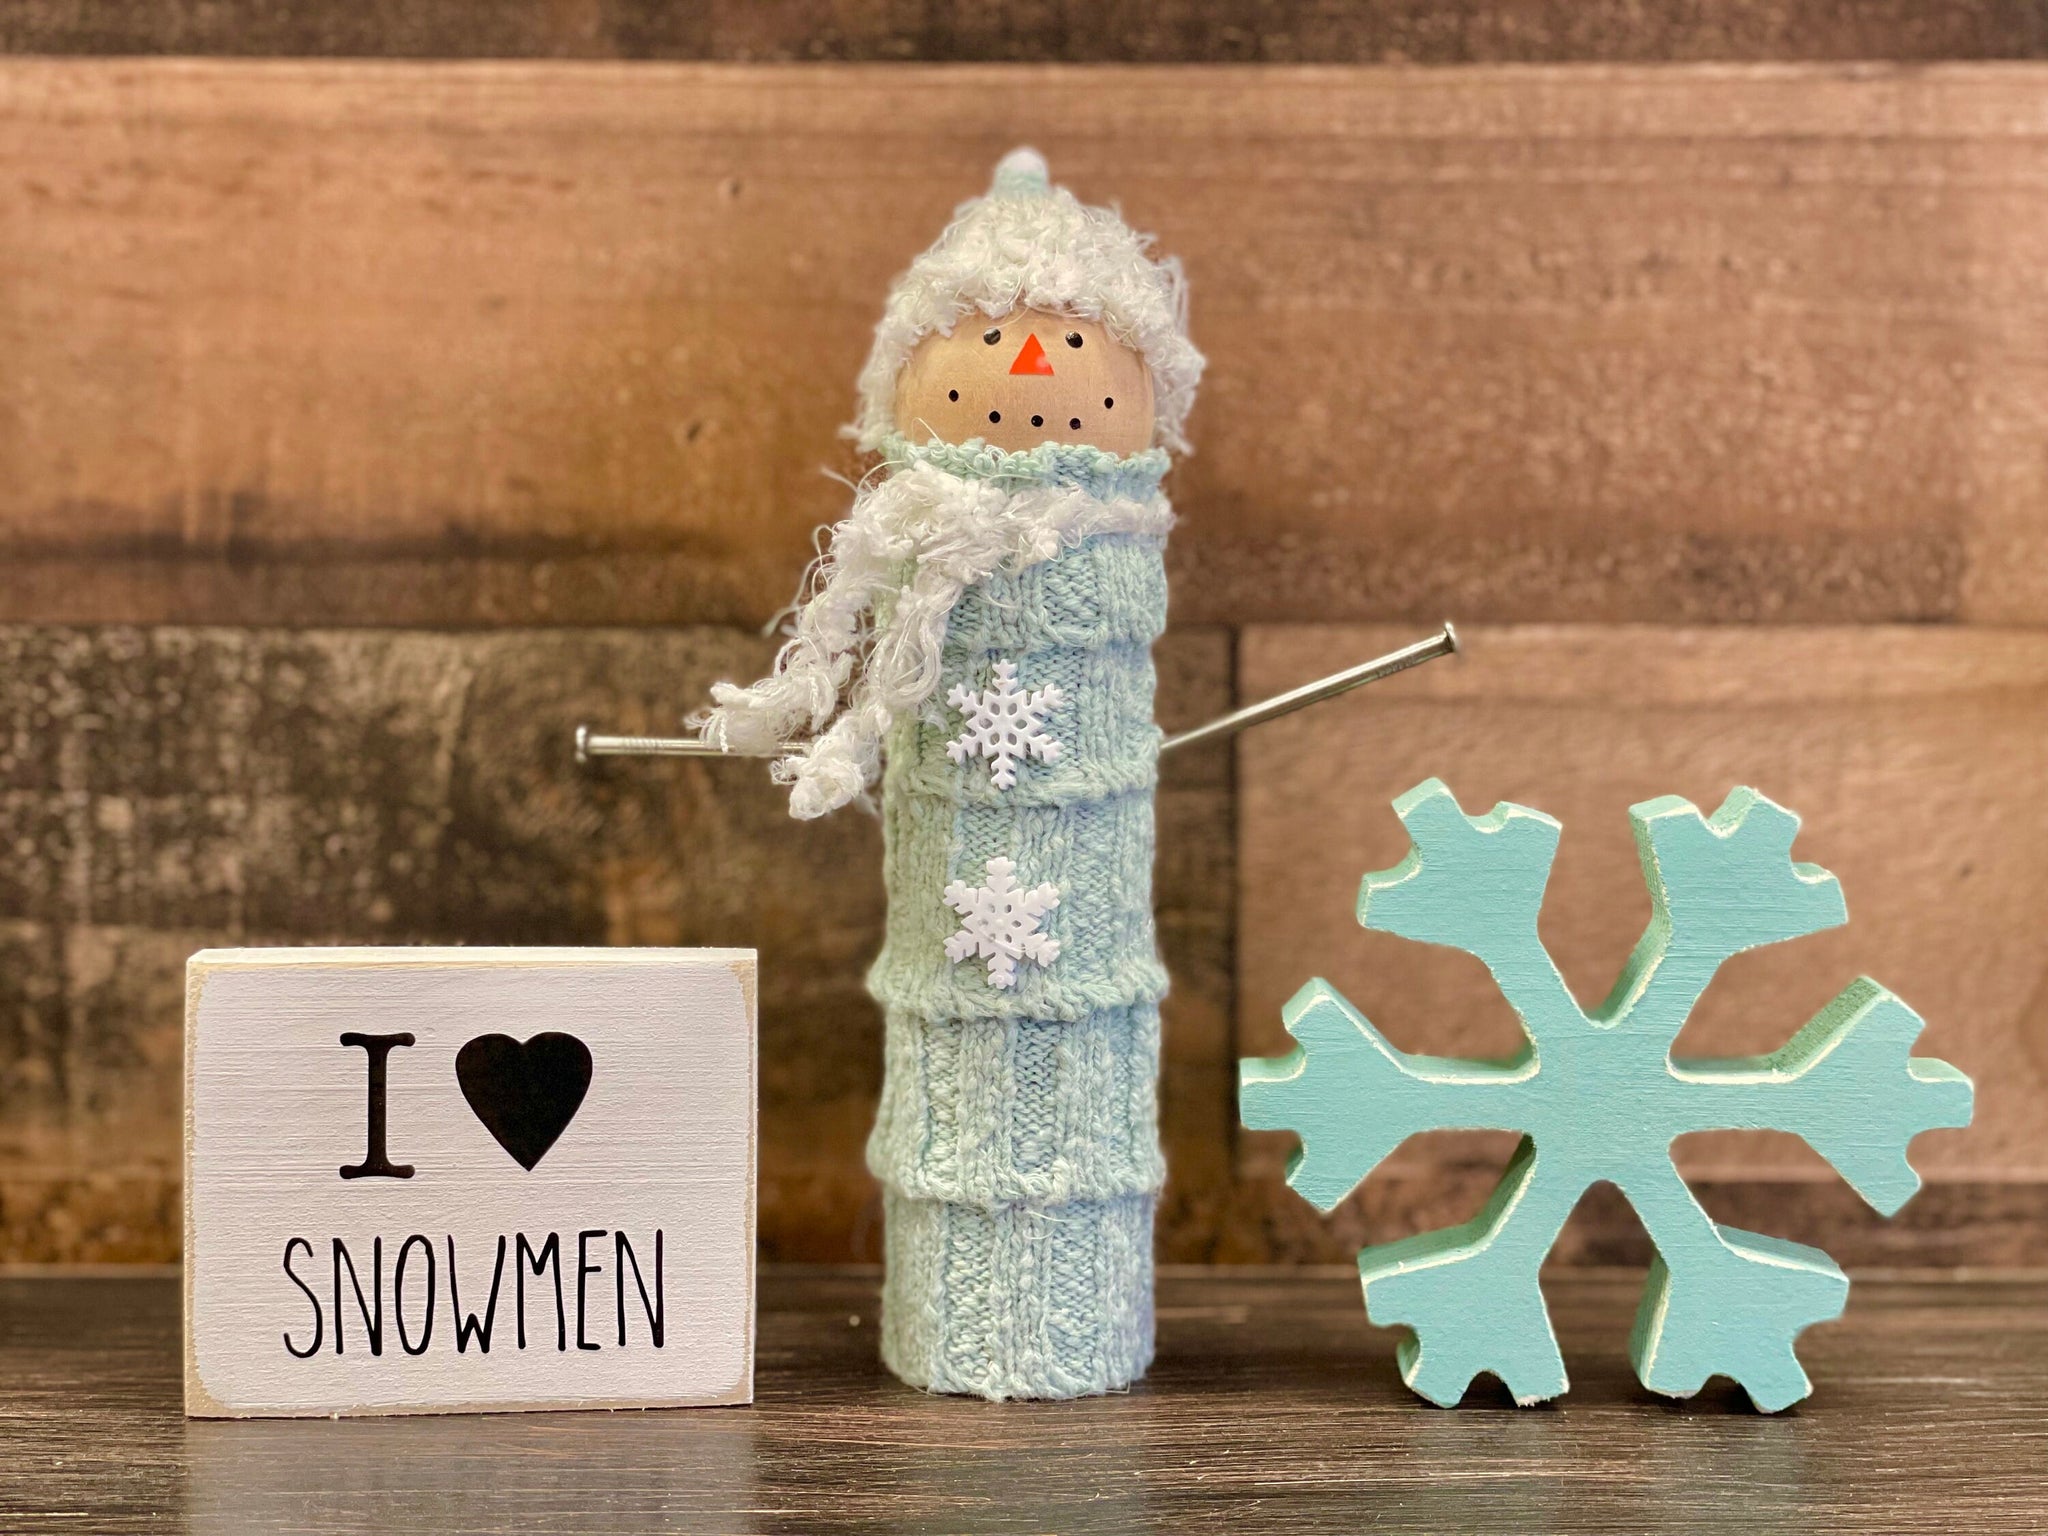 Snowman collector, Wood snowman, Winter decor for tiered tray, Wooden snowflake, Sweater snowman, I love snowmen sign